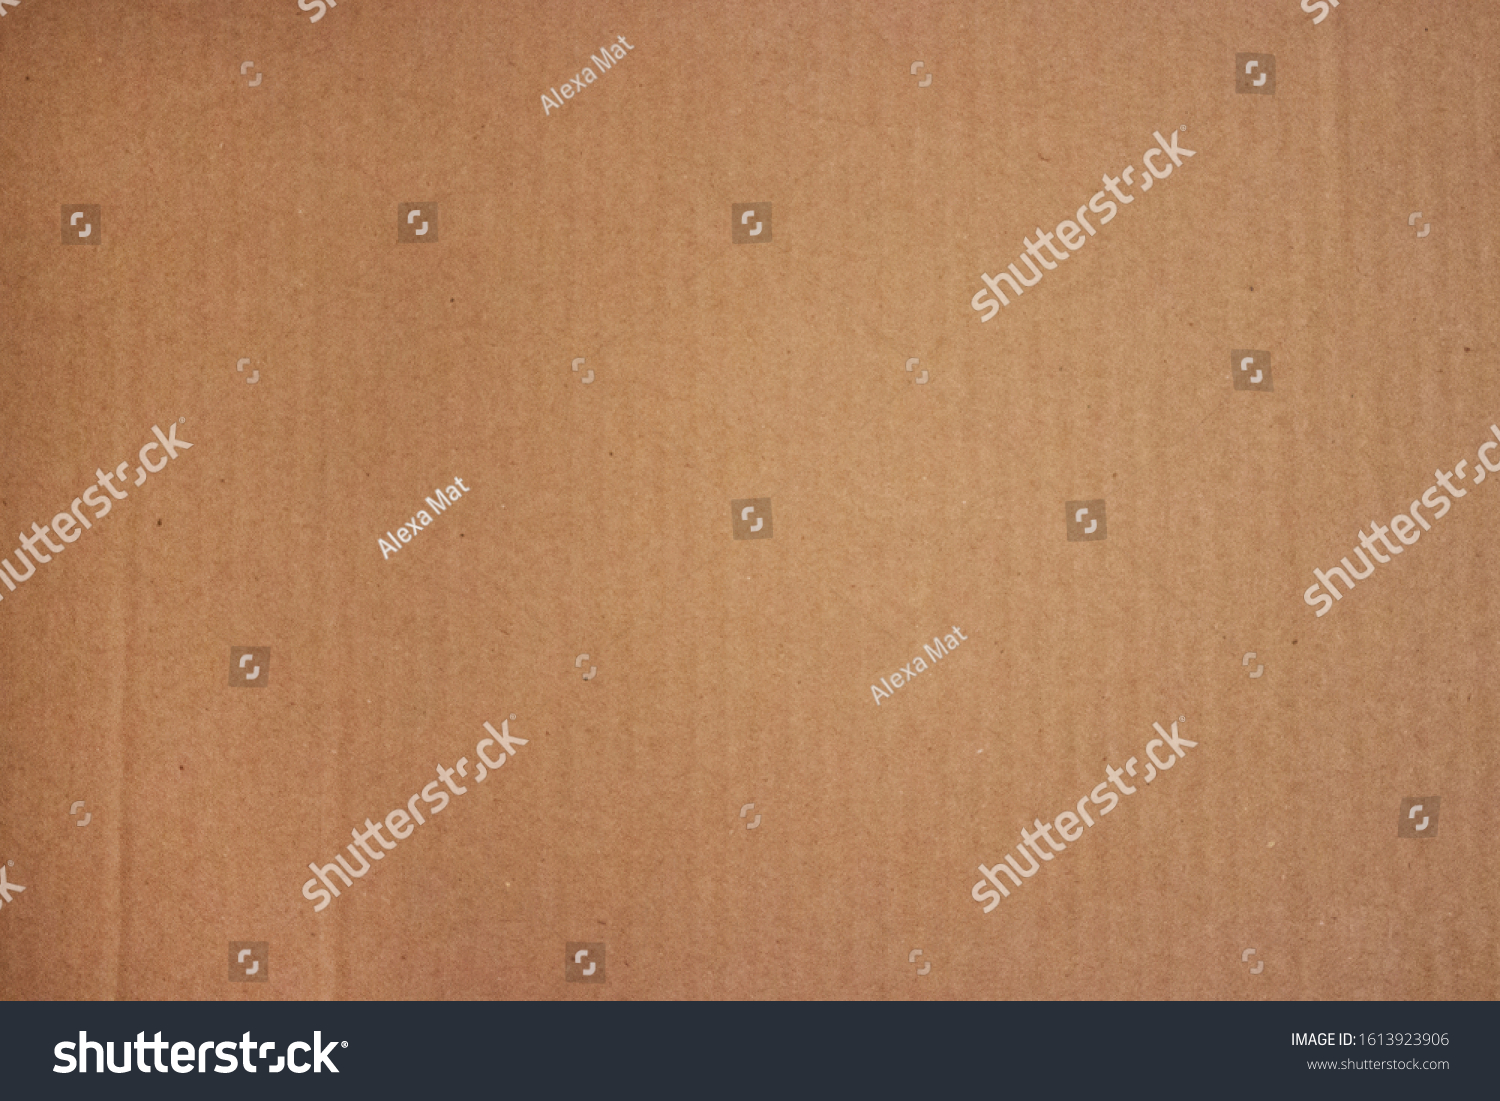 Brown corrugated cardboard texture useful as a background. Cardboard Texture. Cardboard Craft Paper Texture. Closeup of cardboard texture #1613923906